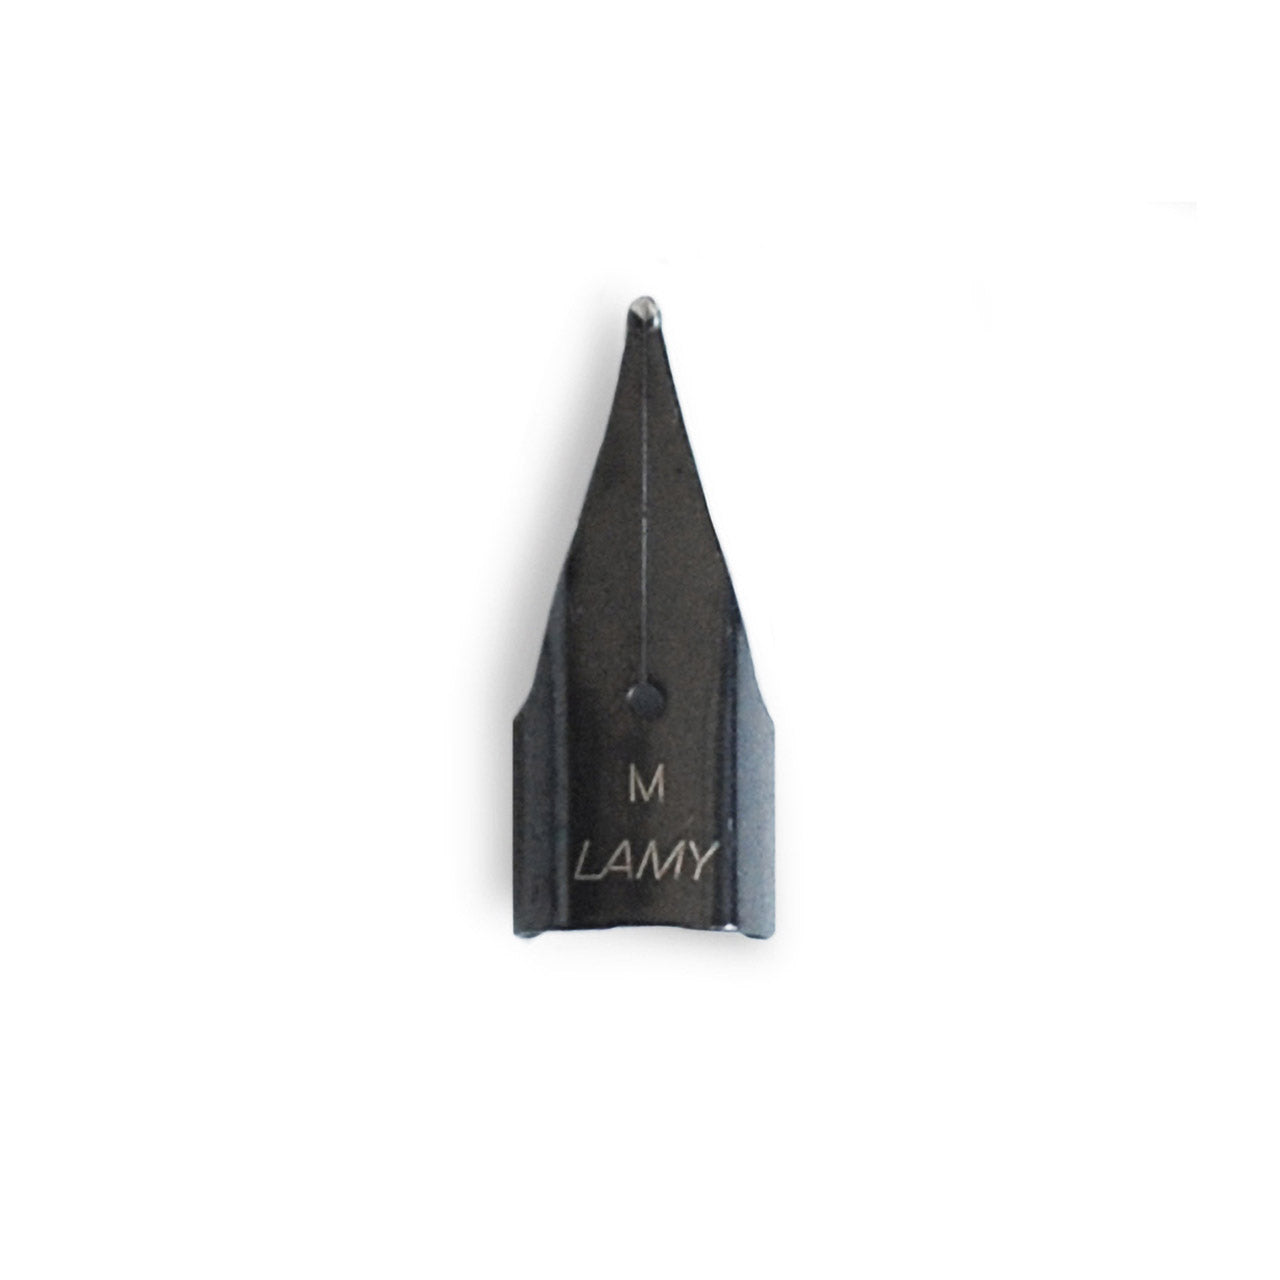 Lamy Nib Stainless Steel Black - Pencraft the boutique